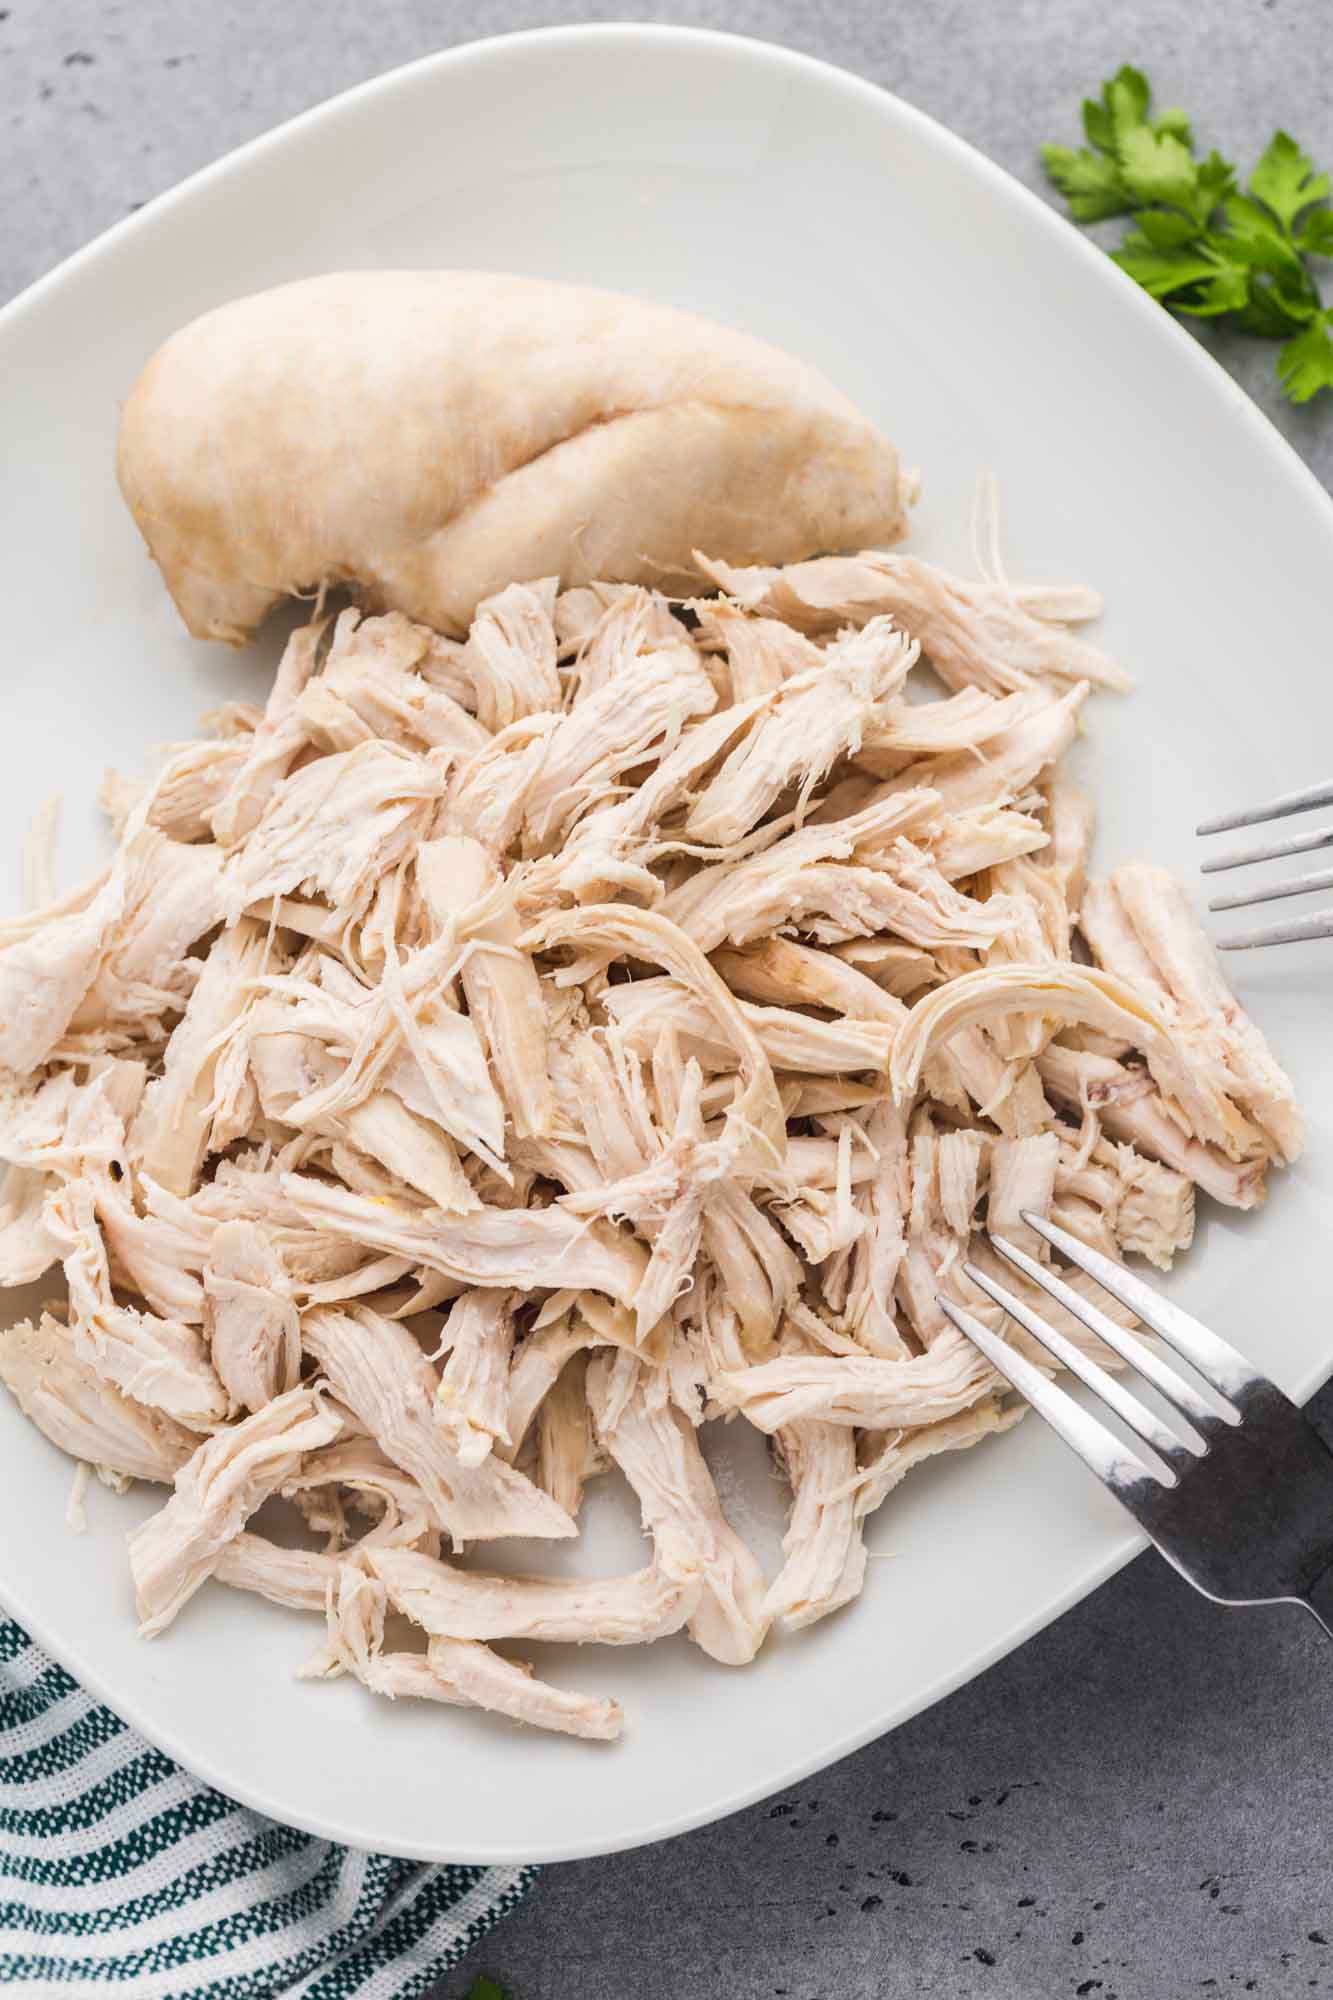 Shredded chicken breast on a white square plate with 2 forks